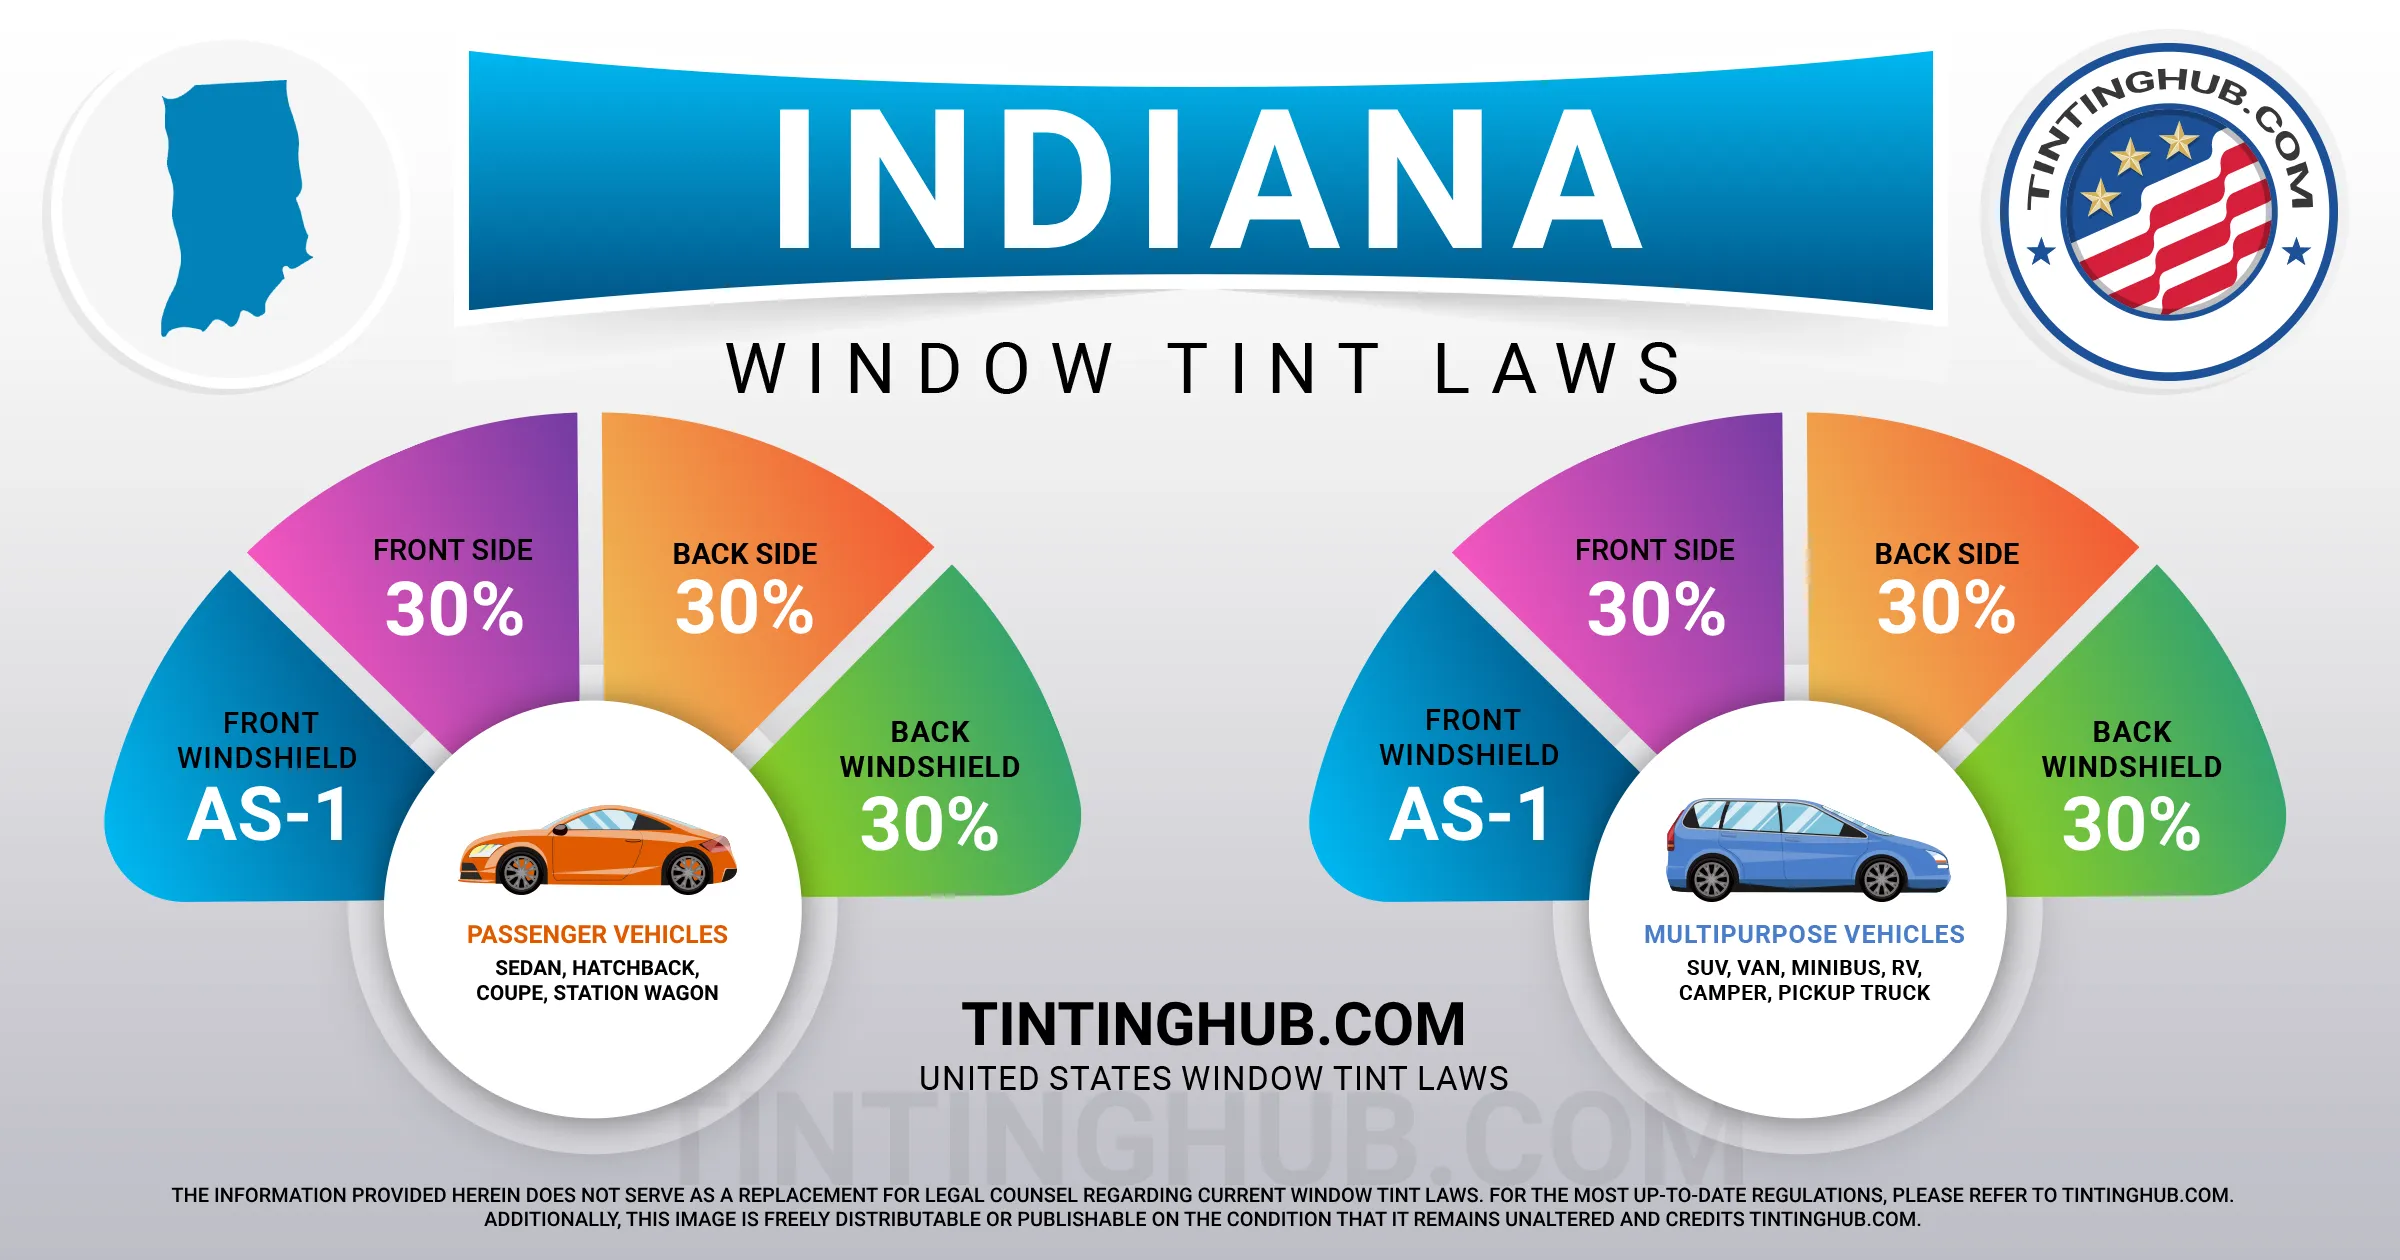 Indiana Automobile Window Tint Laws